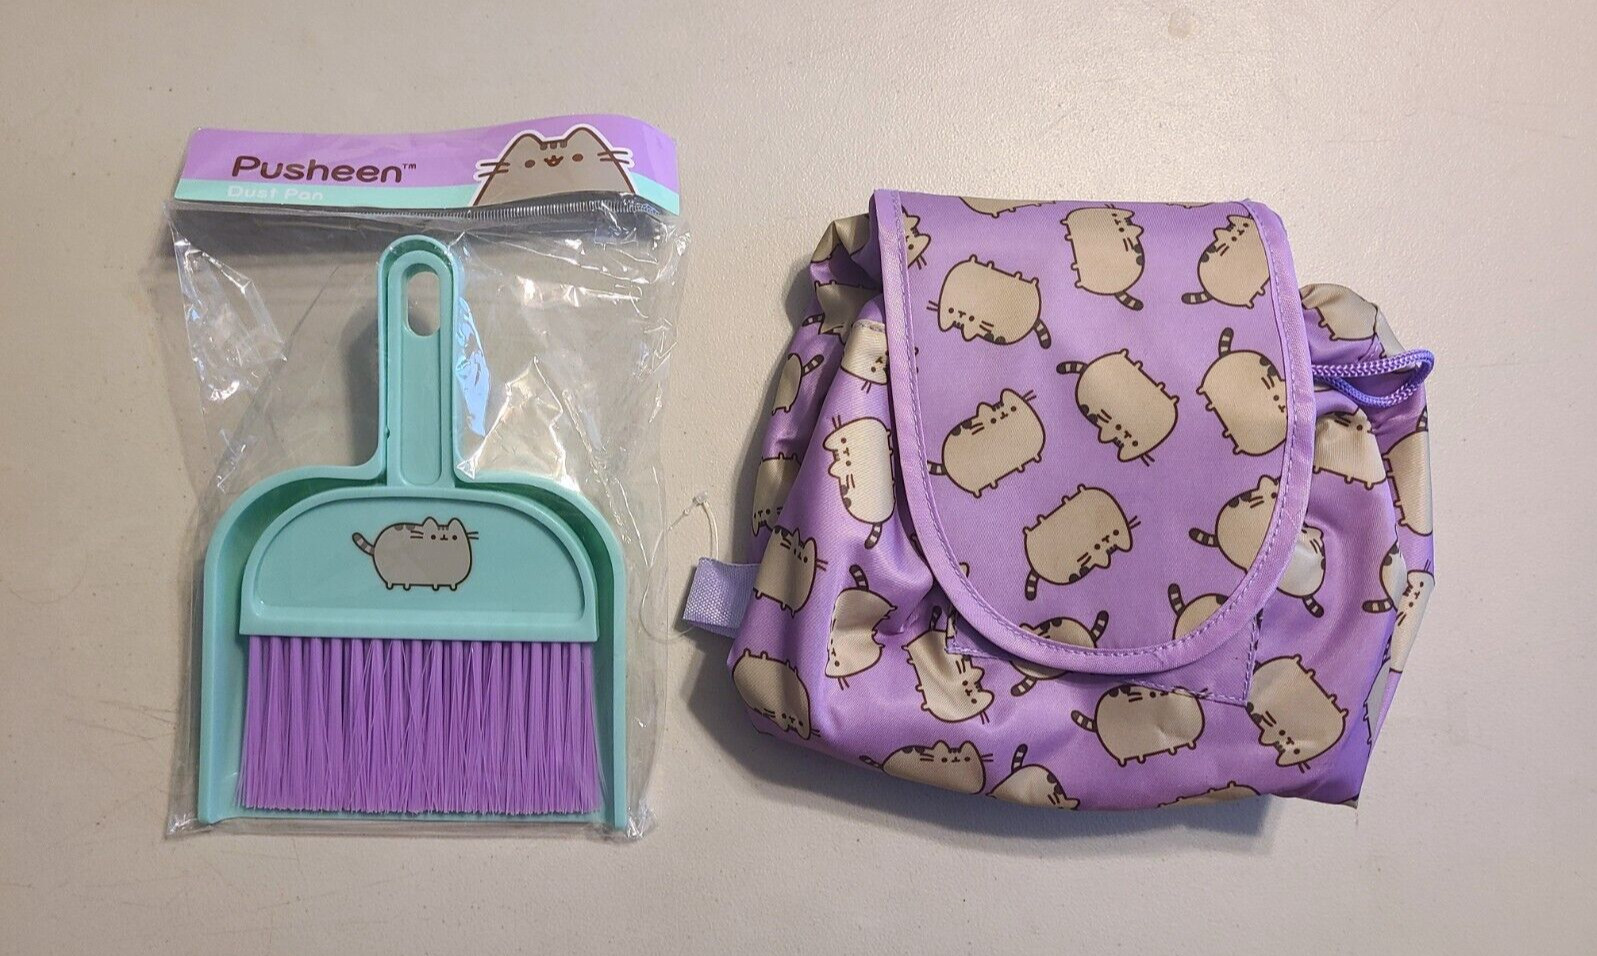 Pusheen Mini Dust Pan and Drawstring Pouch - CultureFly Exclusive Fall 2019